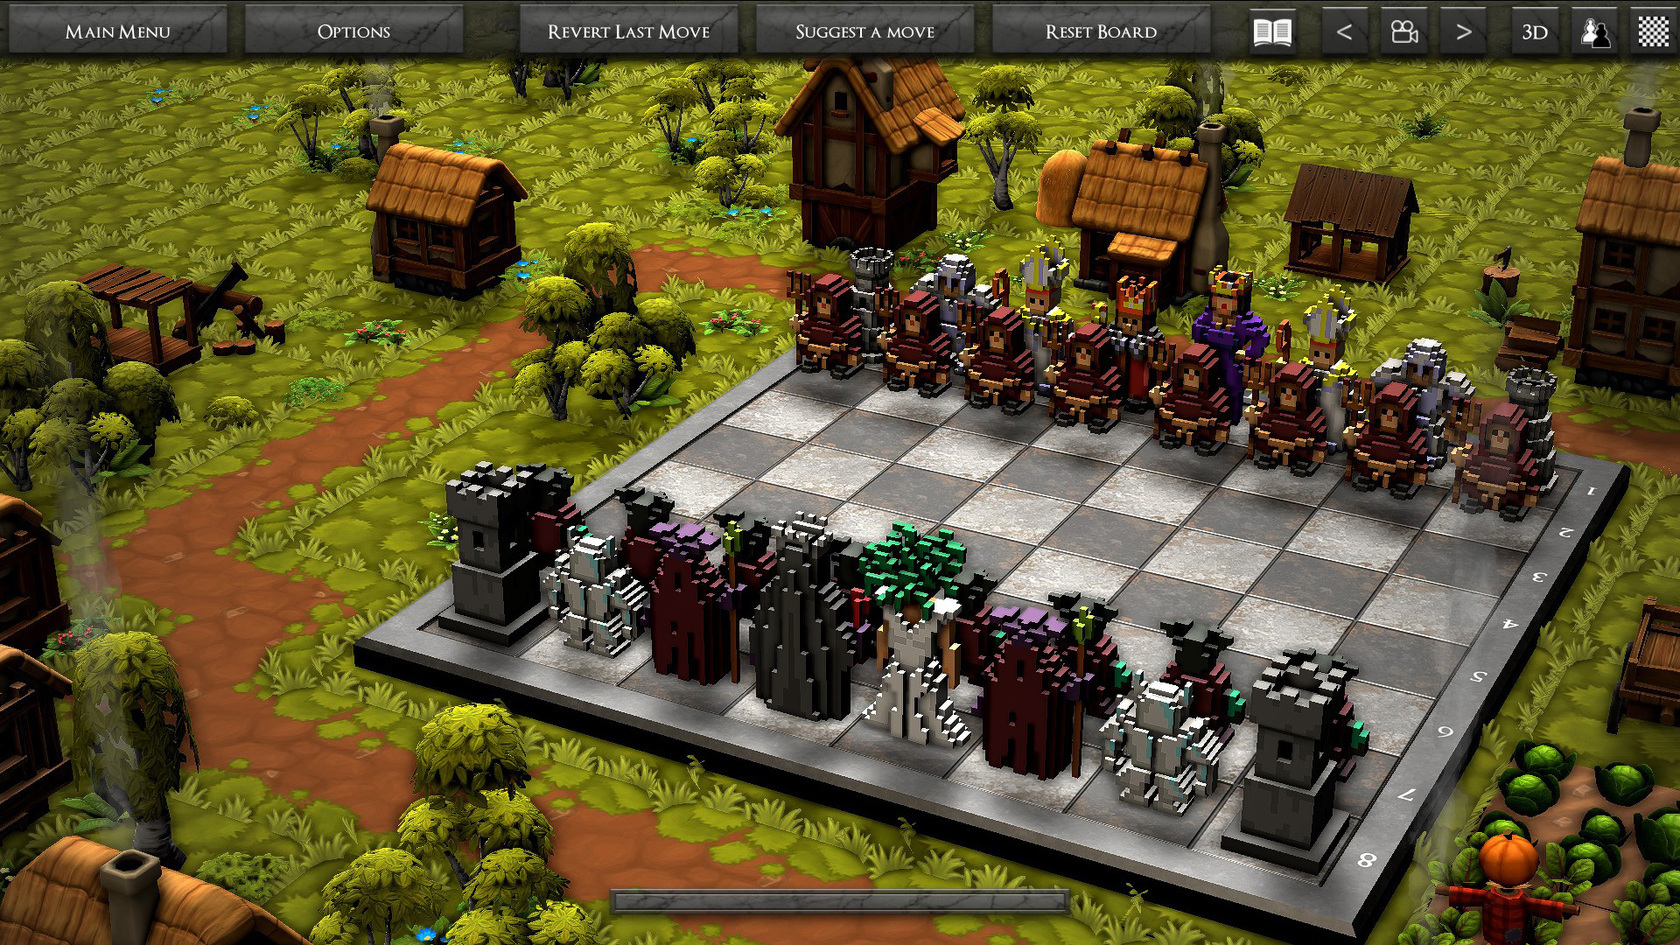 Download 3D Chess Game for PC/3D Chess Game on PC - Andy - Android